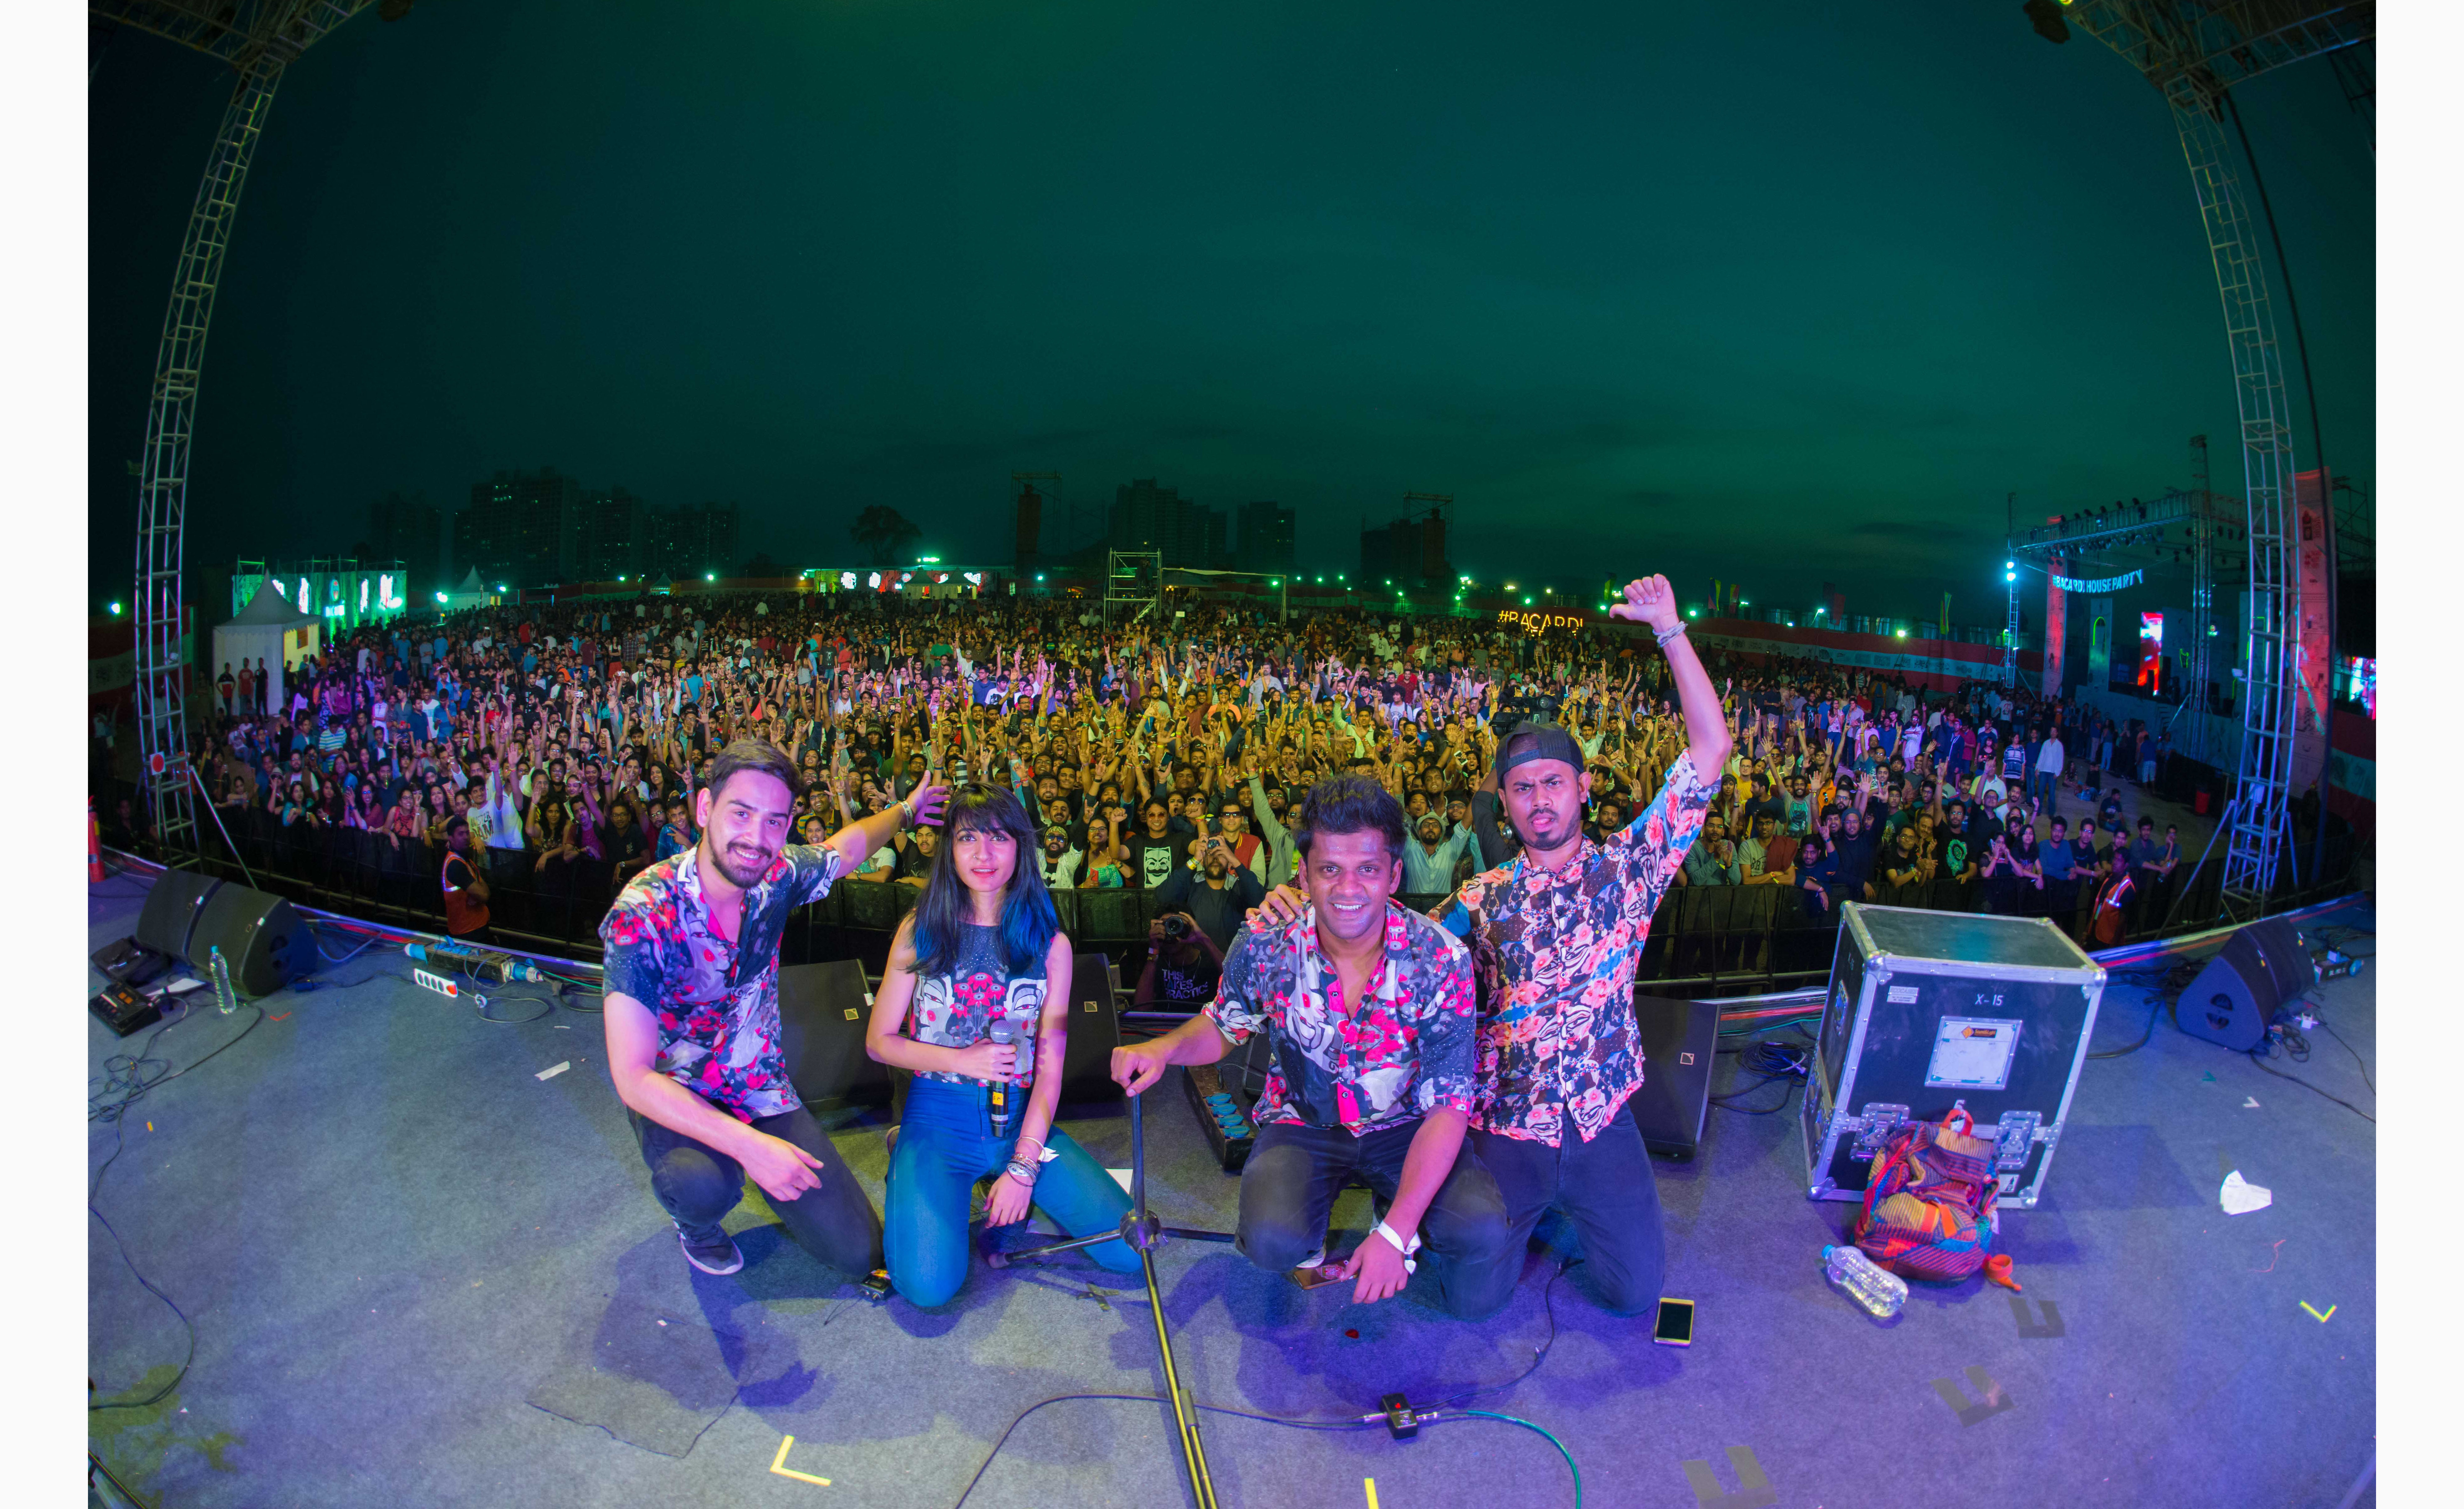 The Ganesh Talkies performance on Day 3 of Bacardi NH7 Weekender Pune. Photo Credit - Clique Photography